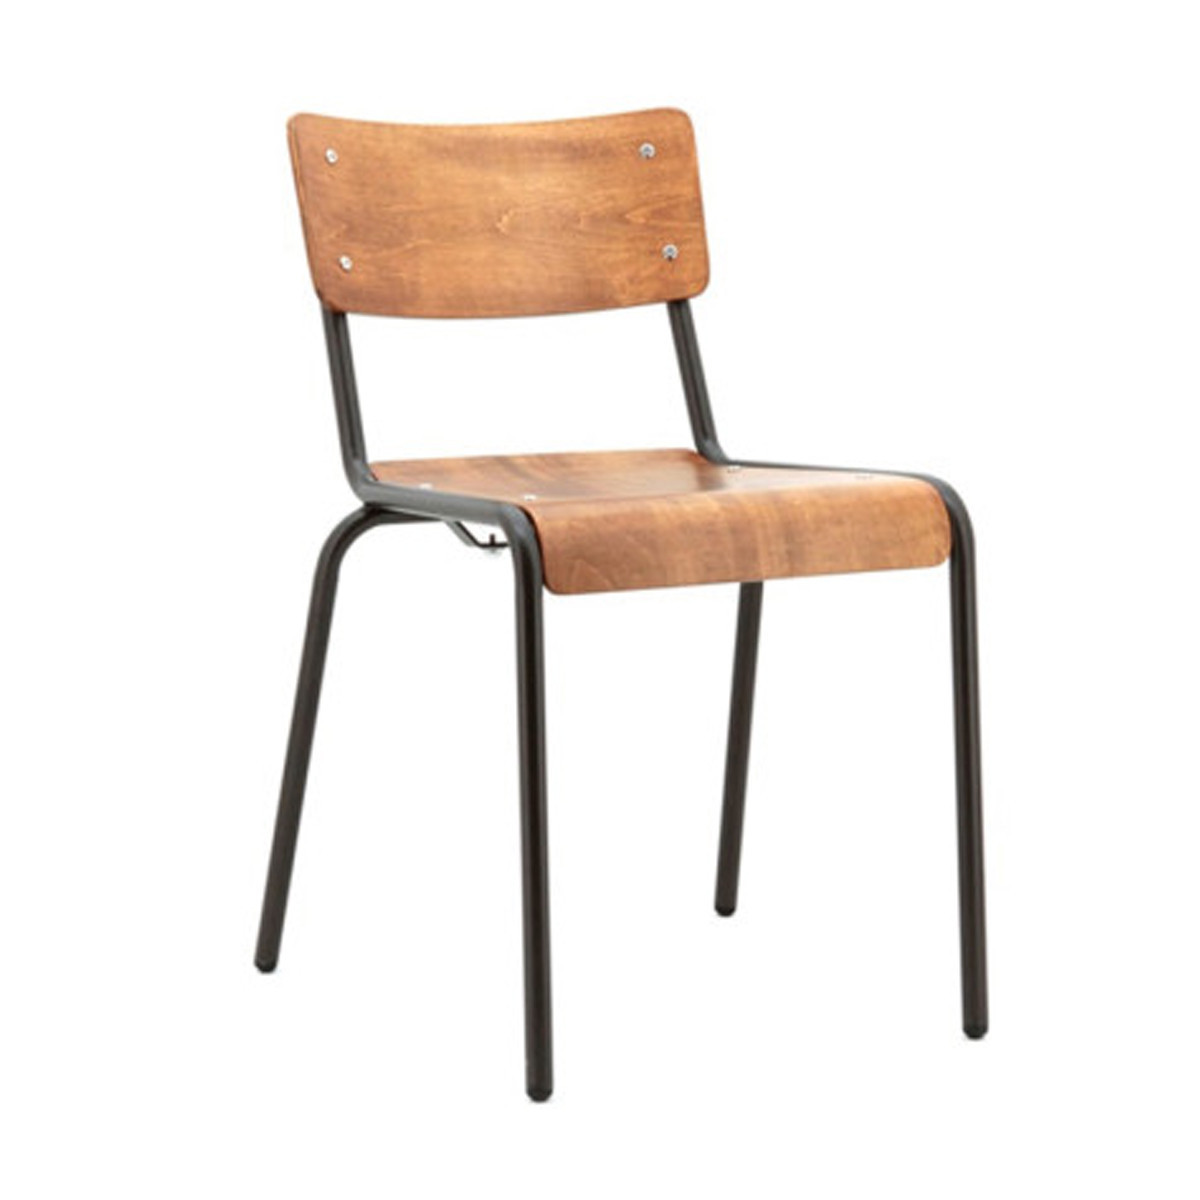 Rent a Dining chair Mentor brown? Rent at KeyPro furniture rental!